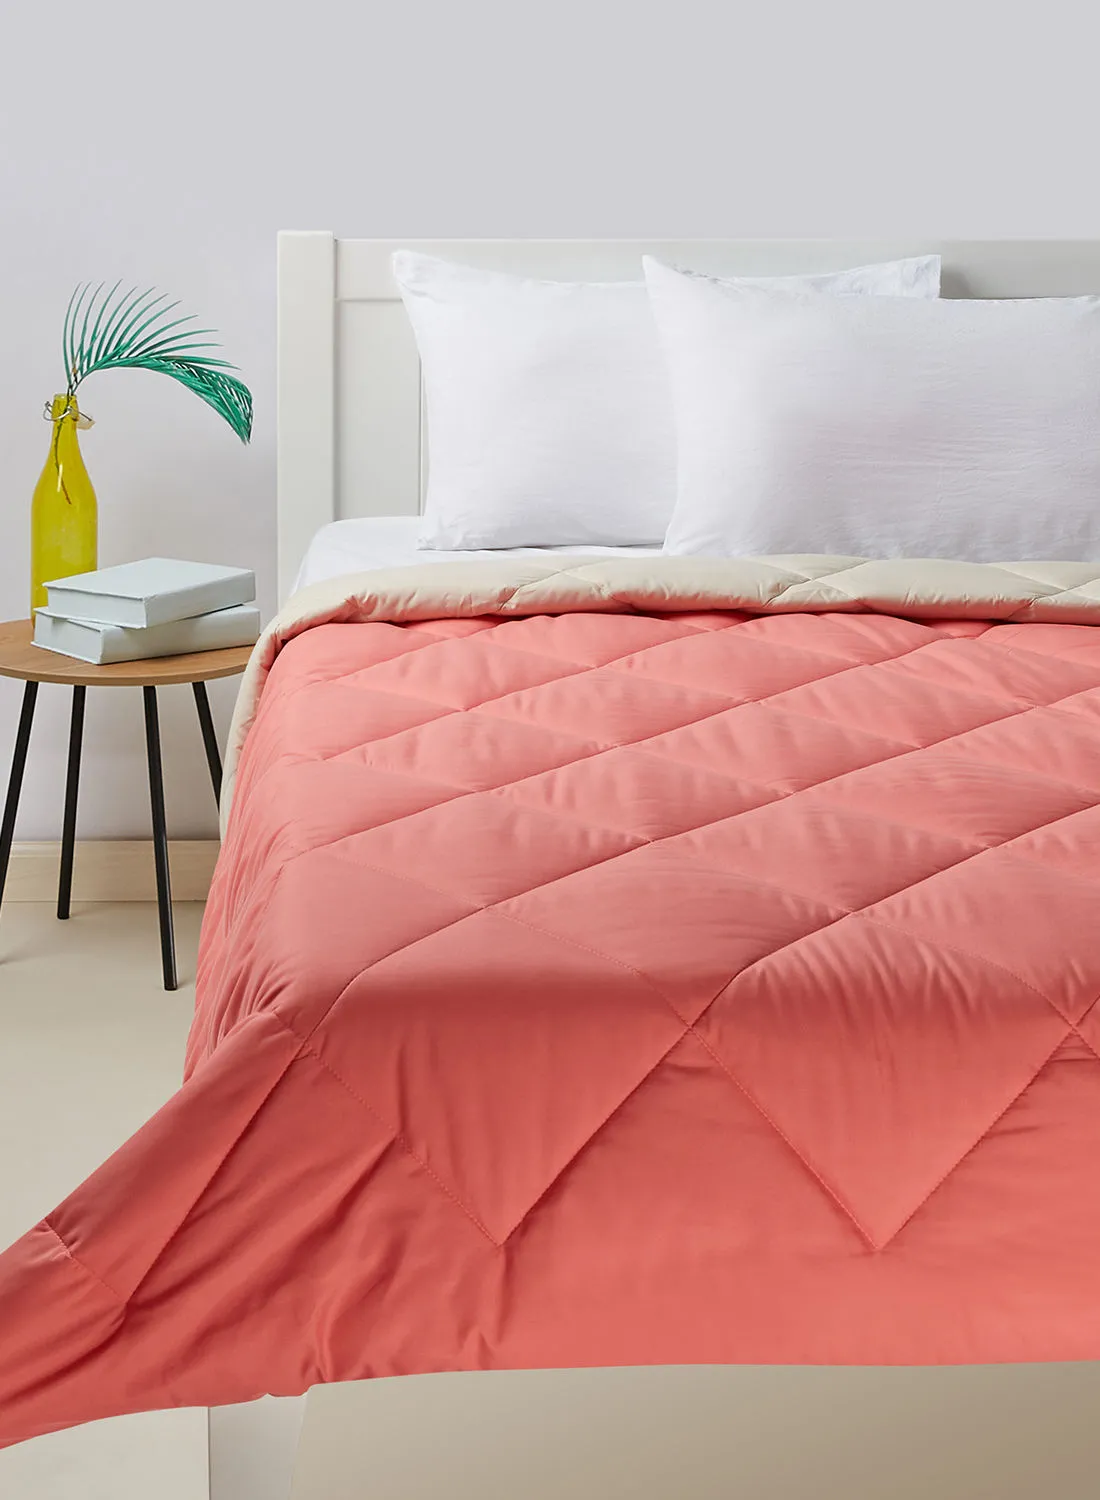 Amal Comforter Queen Size All Season Everyday Use Bedding Set Extra Soft Microfiber Single Piece Reversible Comforter   Coral/Beige